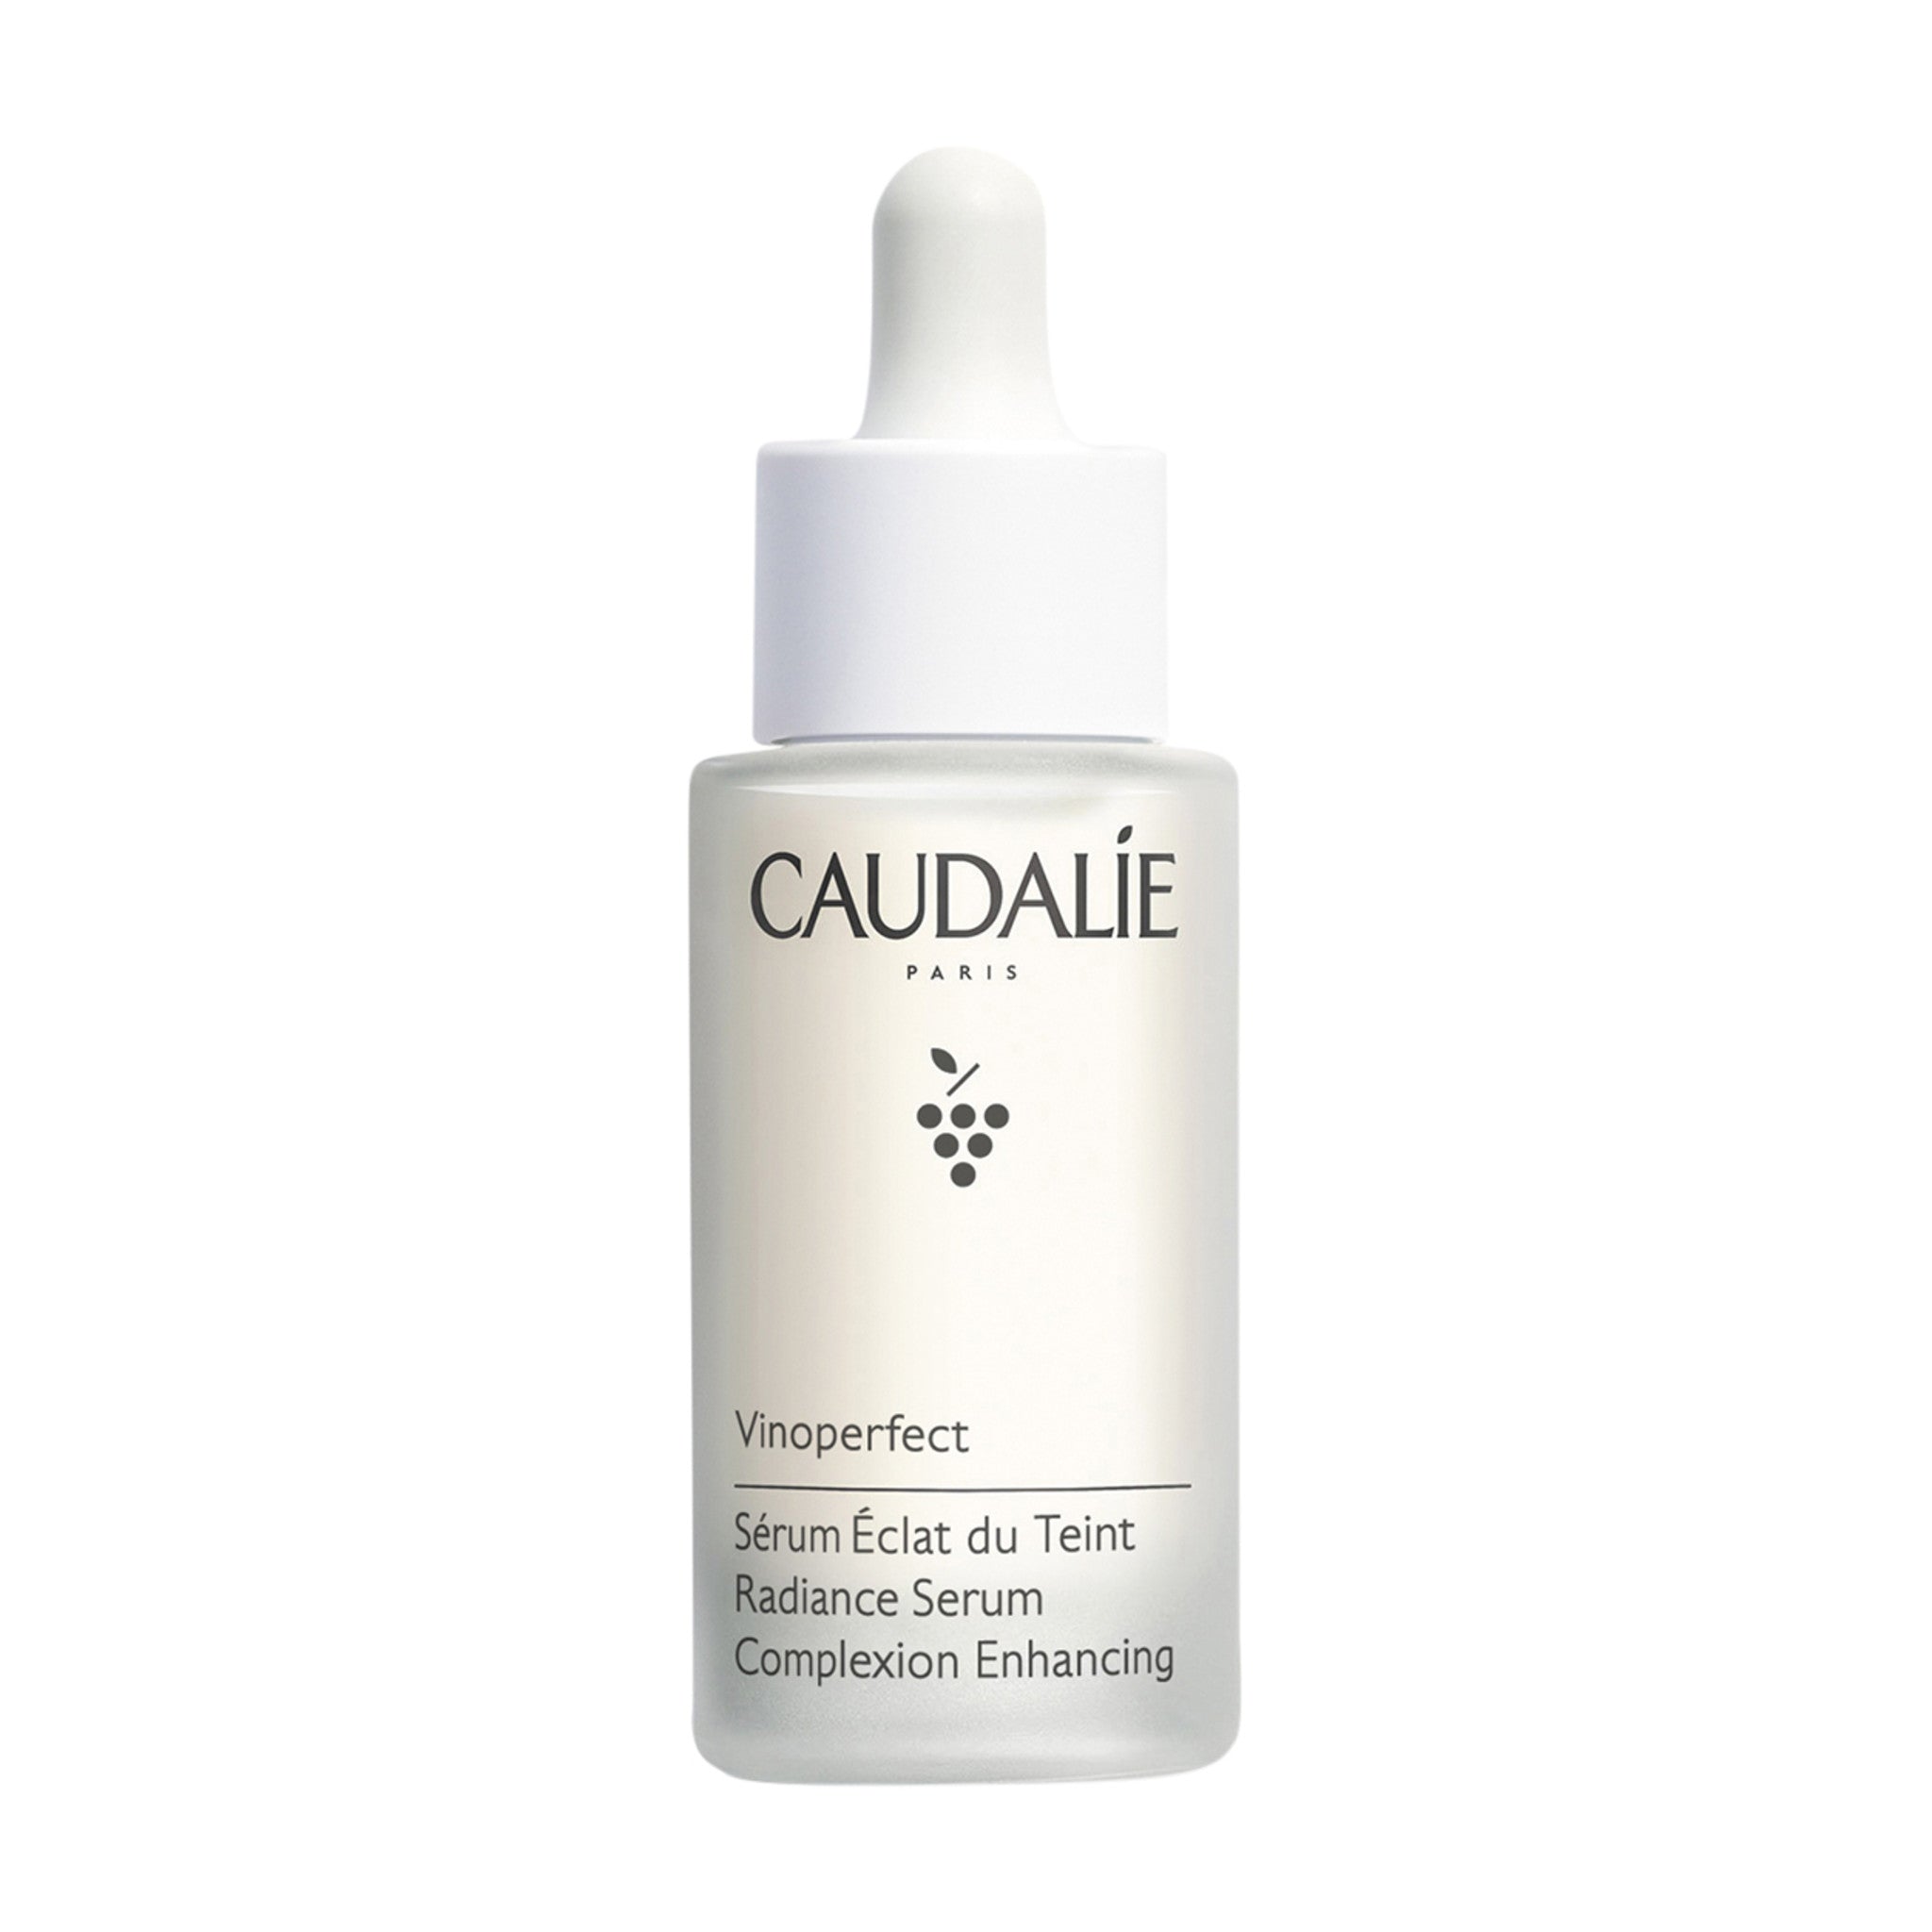 10 Best Caudalie Products That Work Wonders For Your Skin